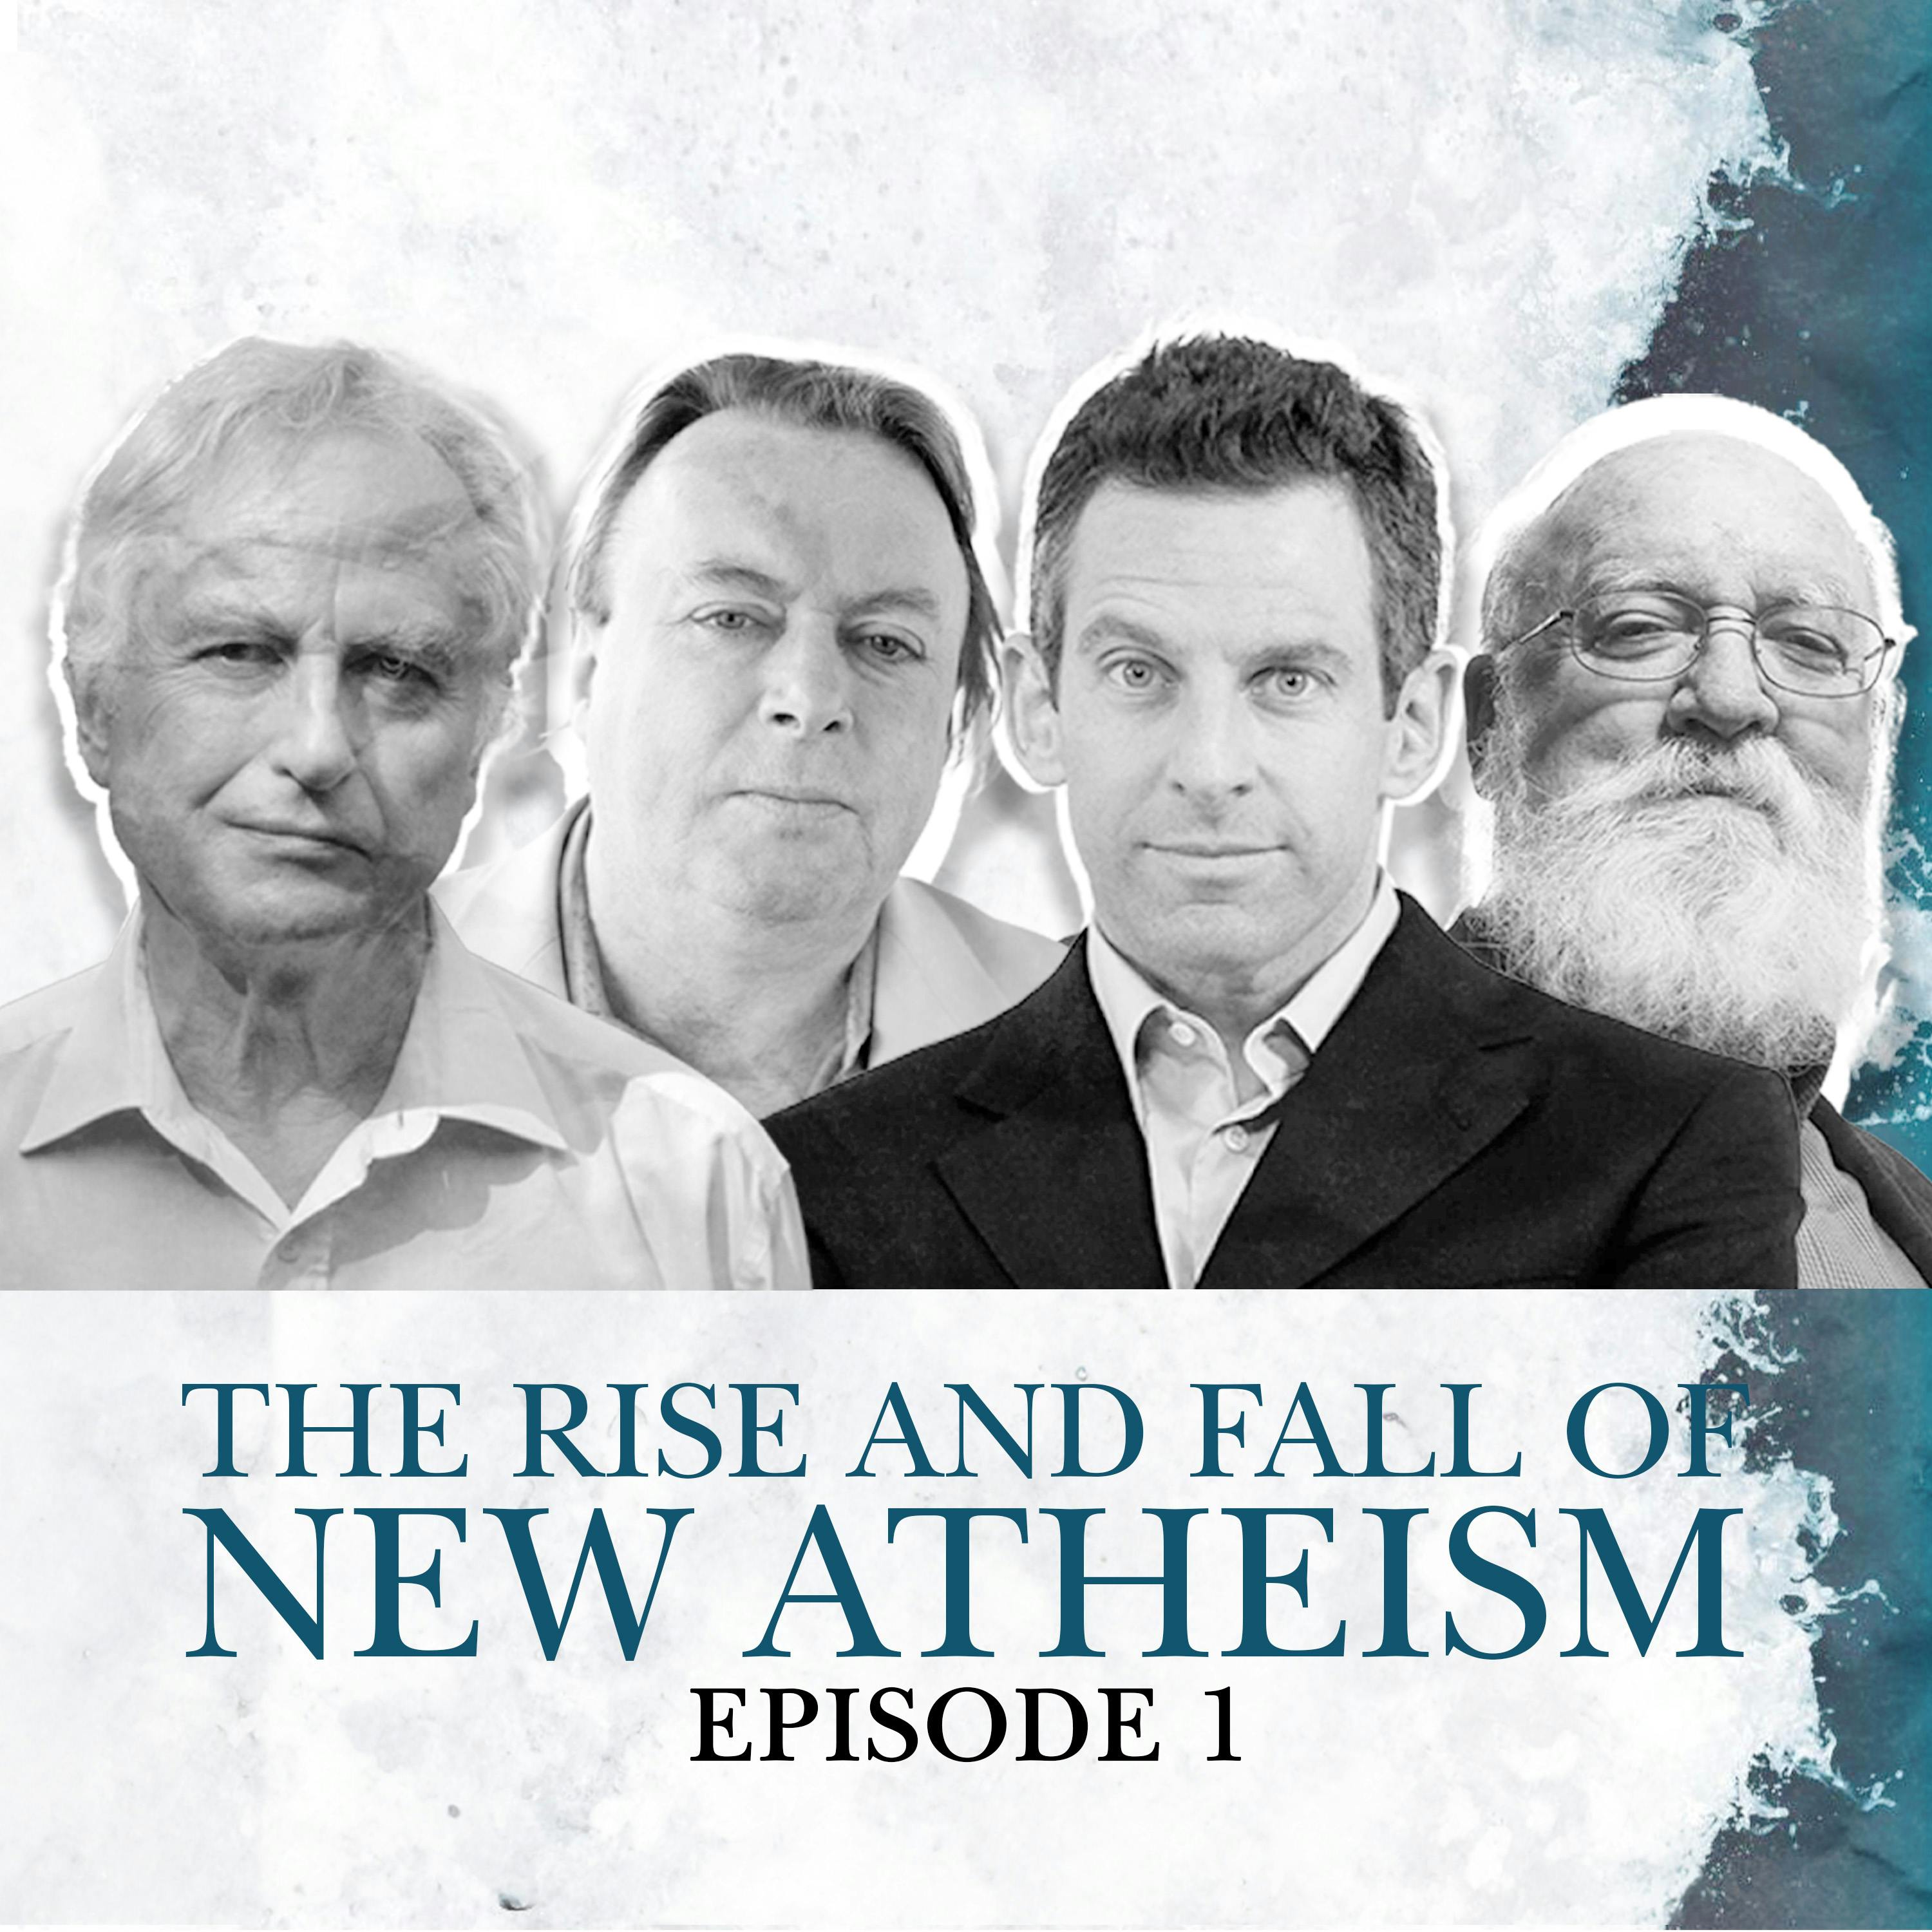 1. The Rise and Fall of New Atheism